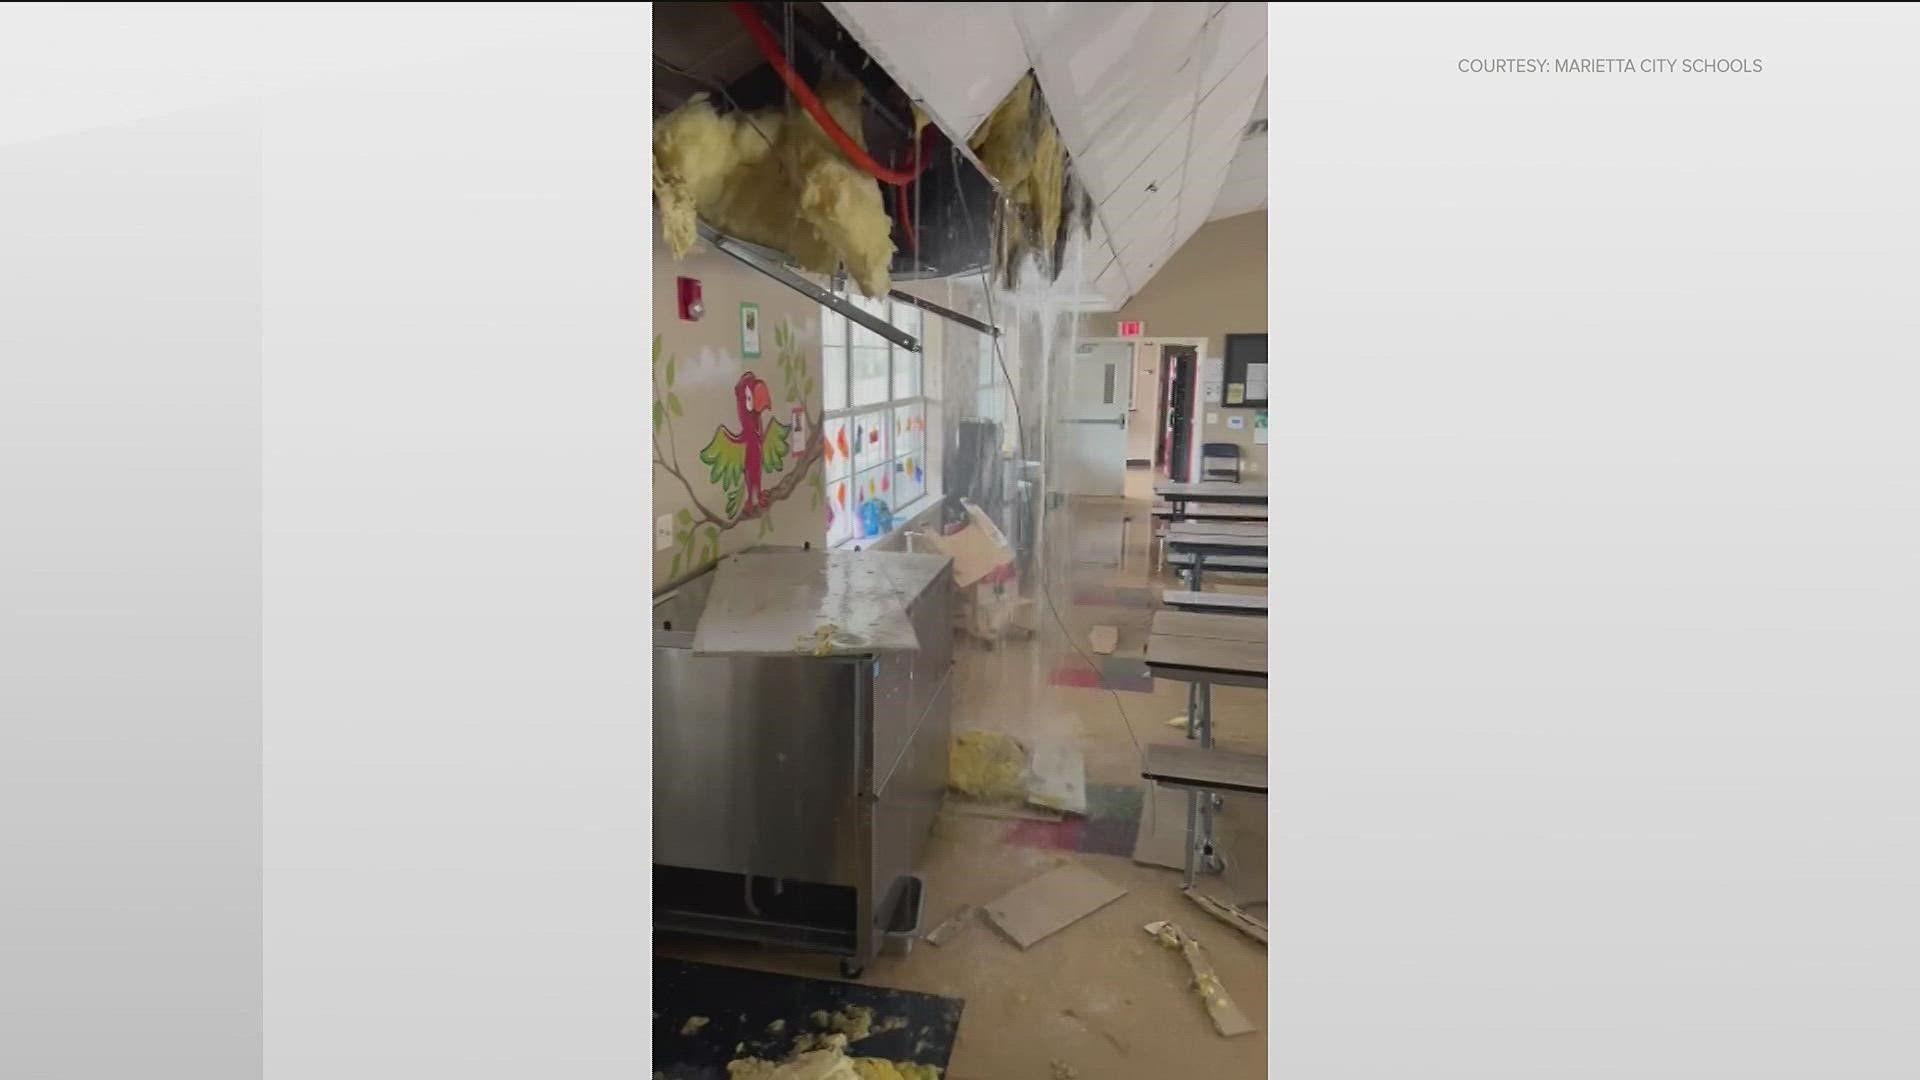 Sawyer Elementary took damage to their hallways, classrooms and media center. The cafeteria inside the Emily Lembeck Early Learning Center was also damaged.